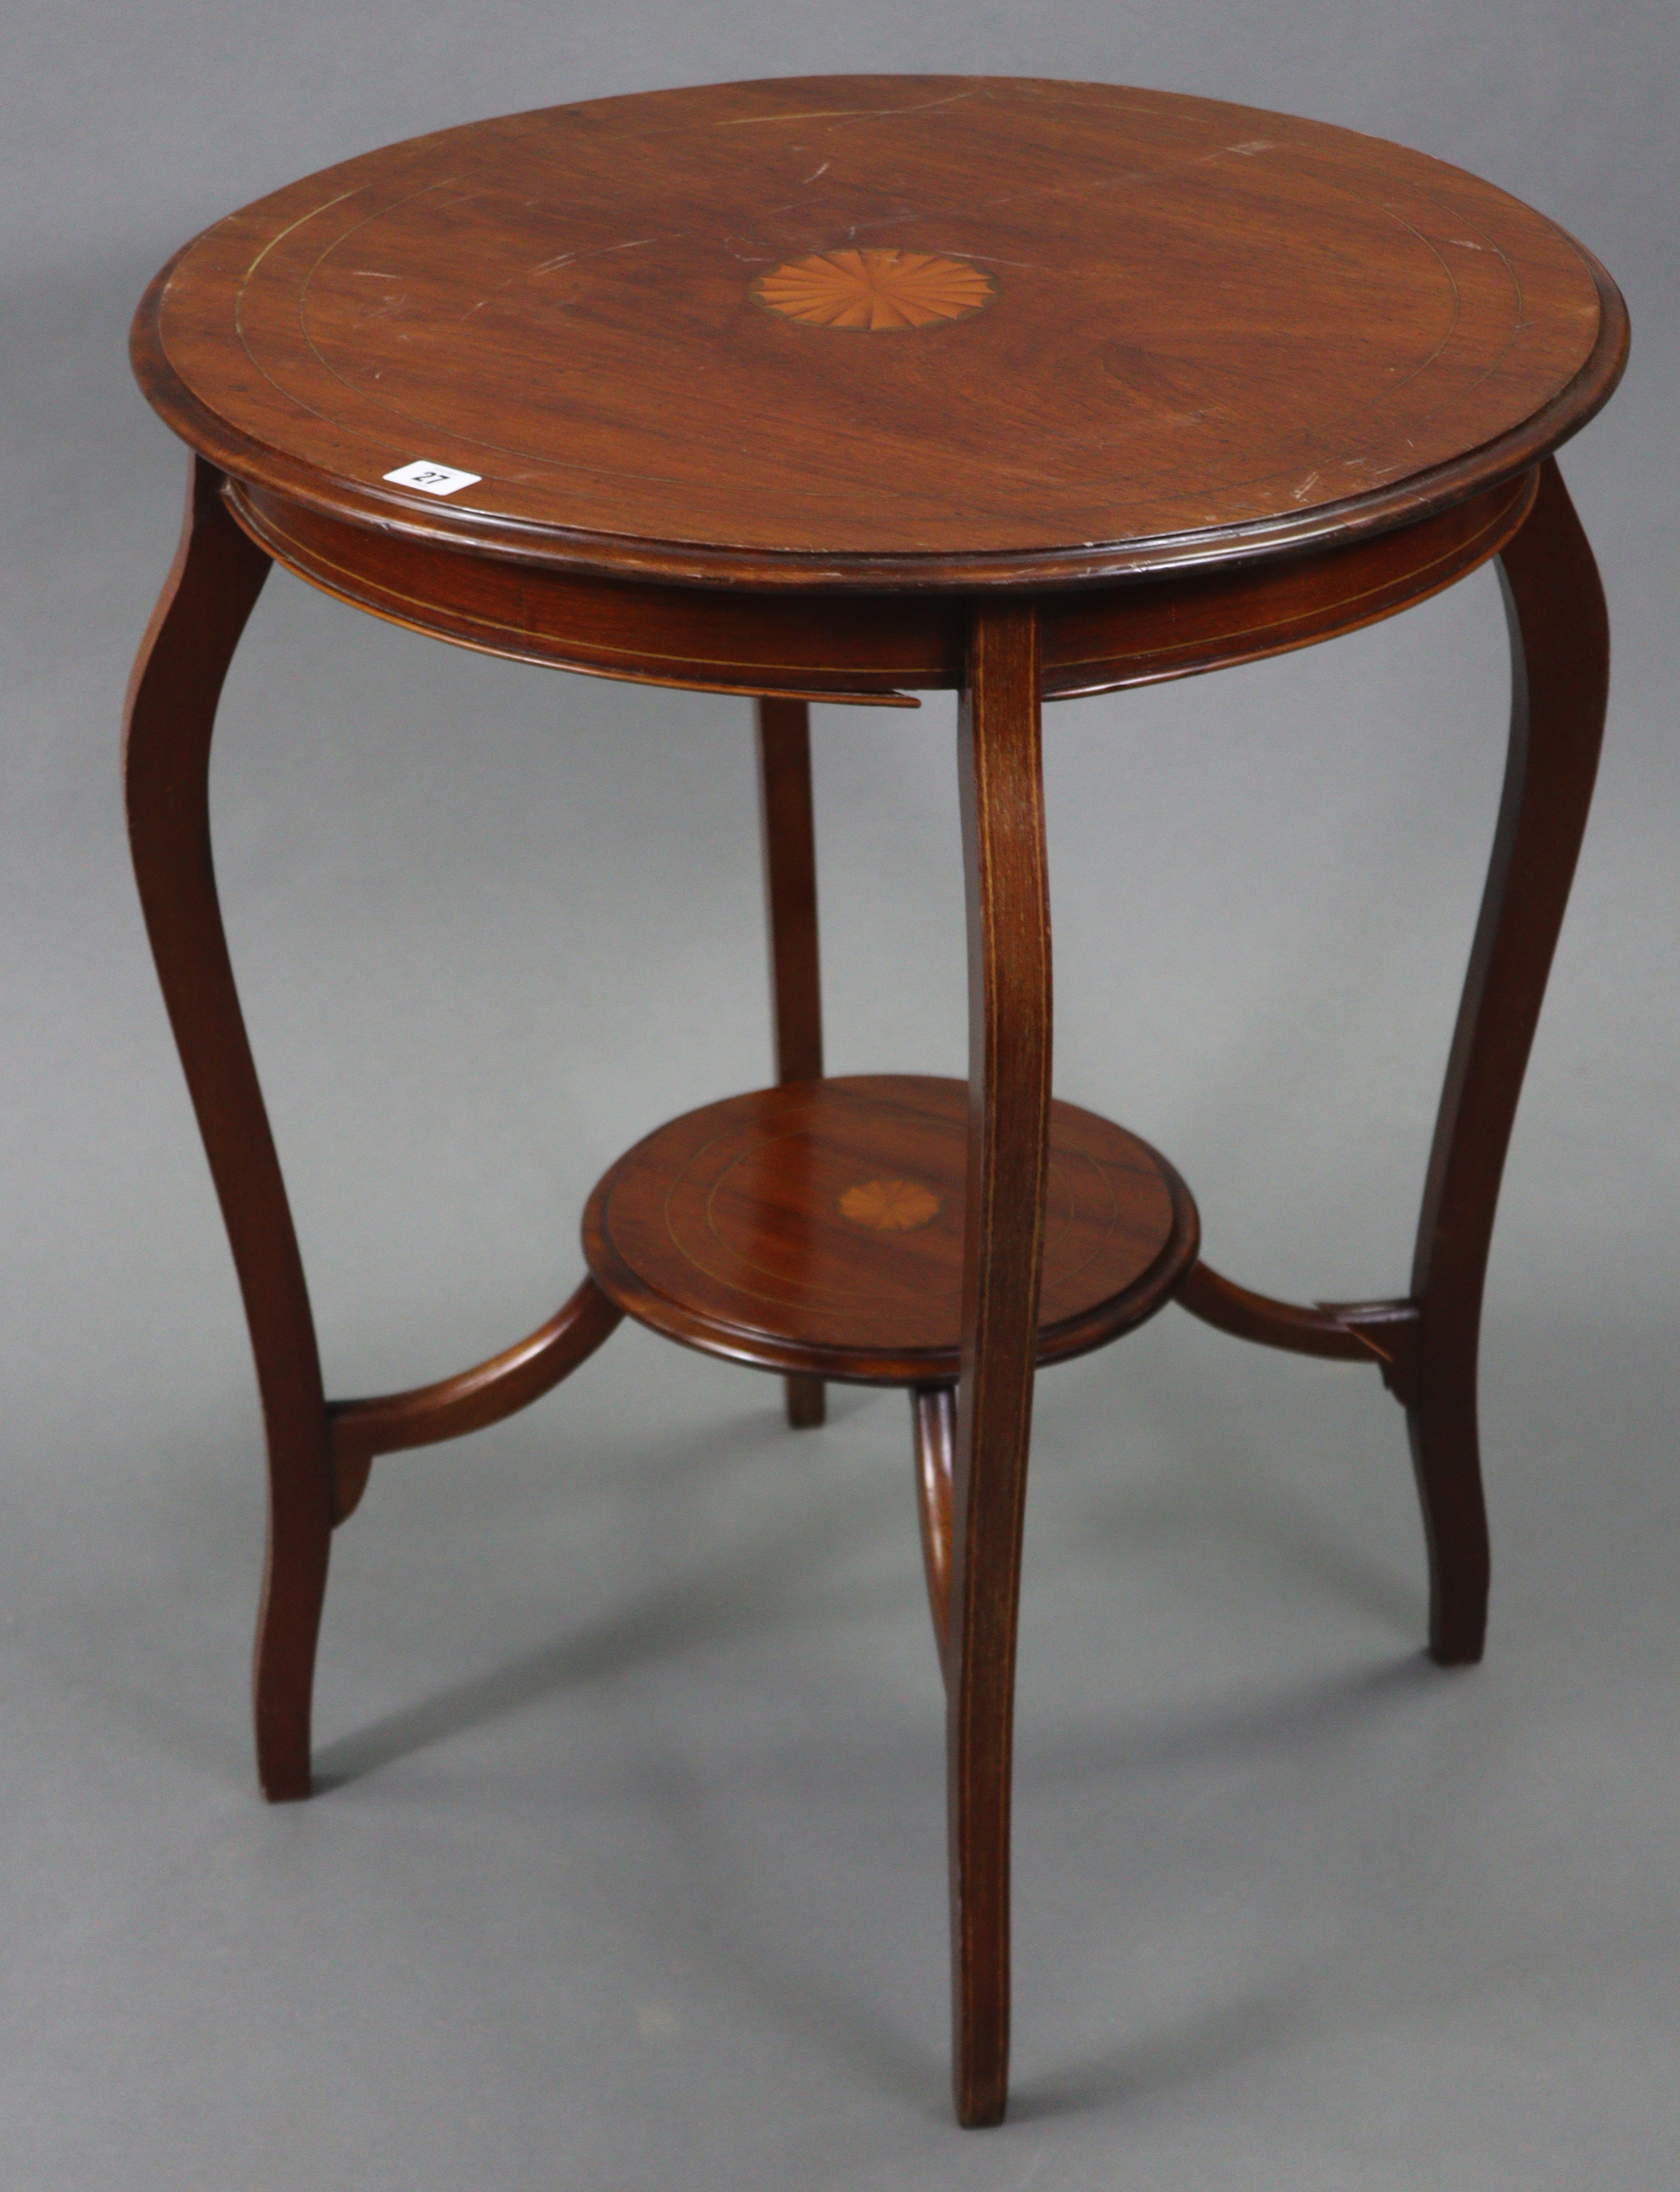 An Edwardian inlaid-mahogany circular two-tier occasional table on four slender cabriole legs, 24”